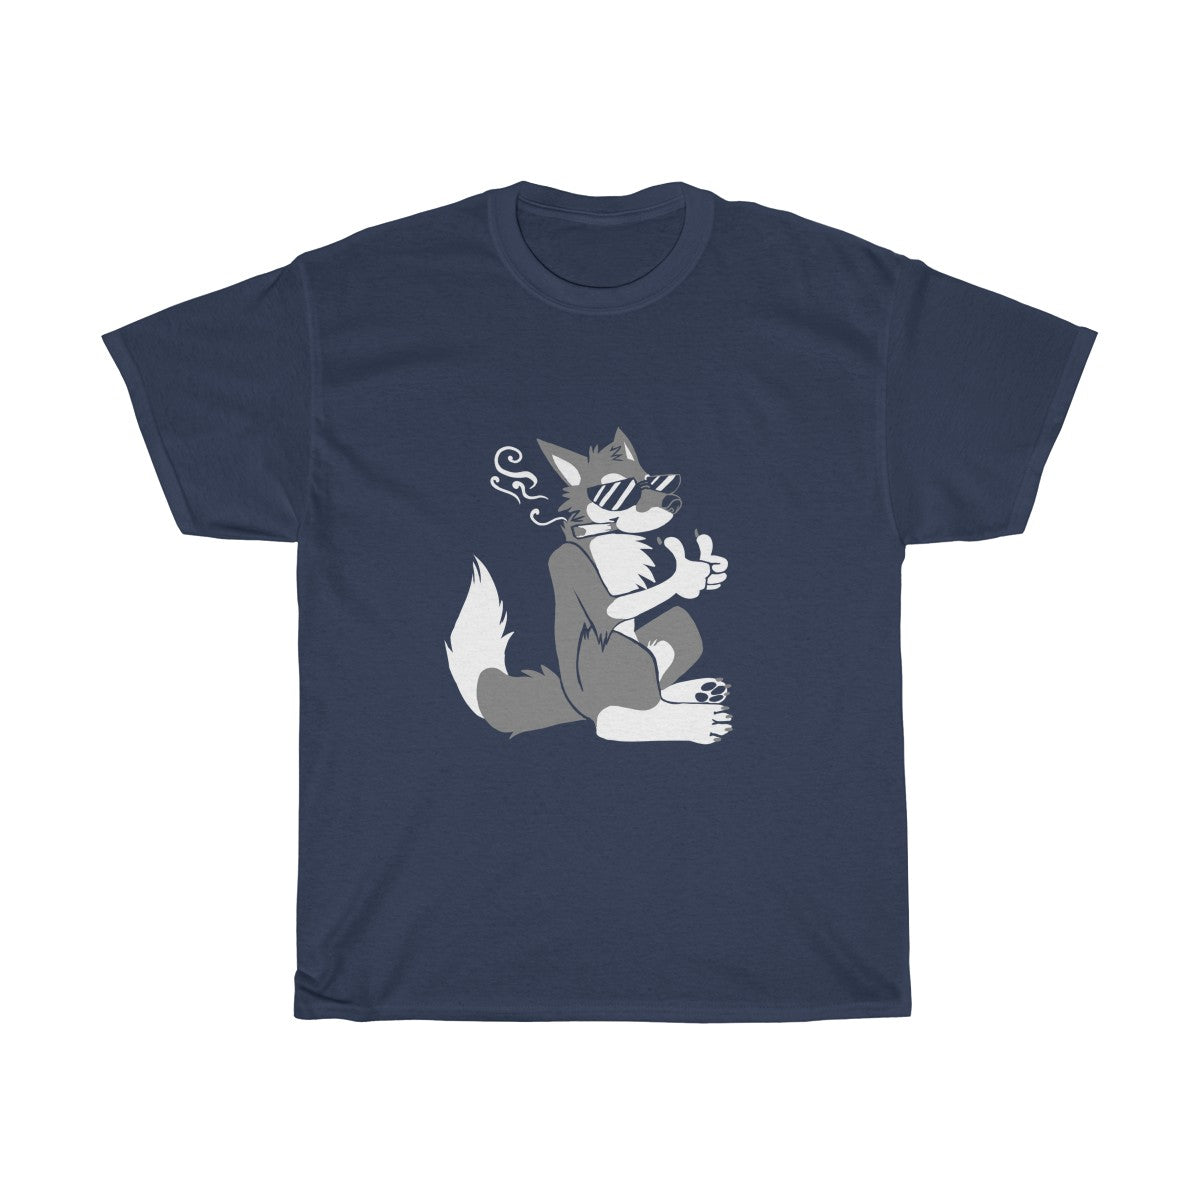 Chill Out - T-Shirt T-Shirt Dire Creatures Navy Blue S 